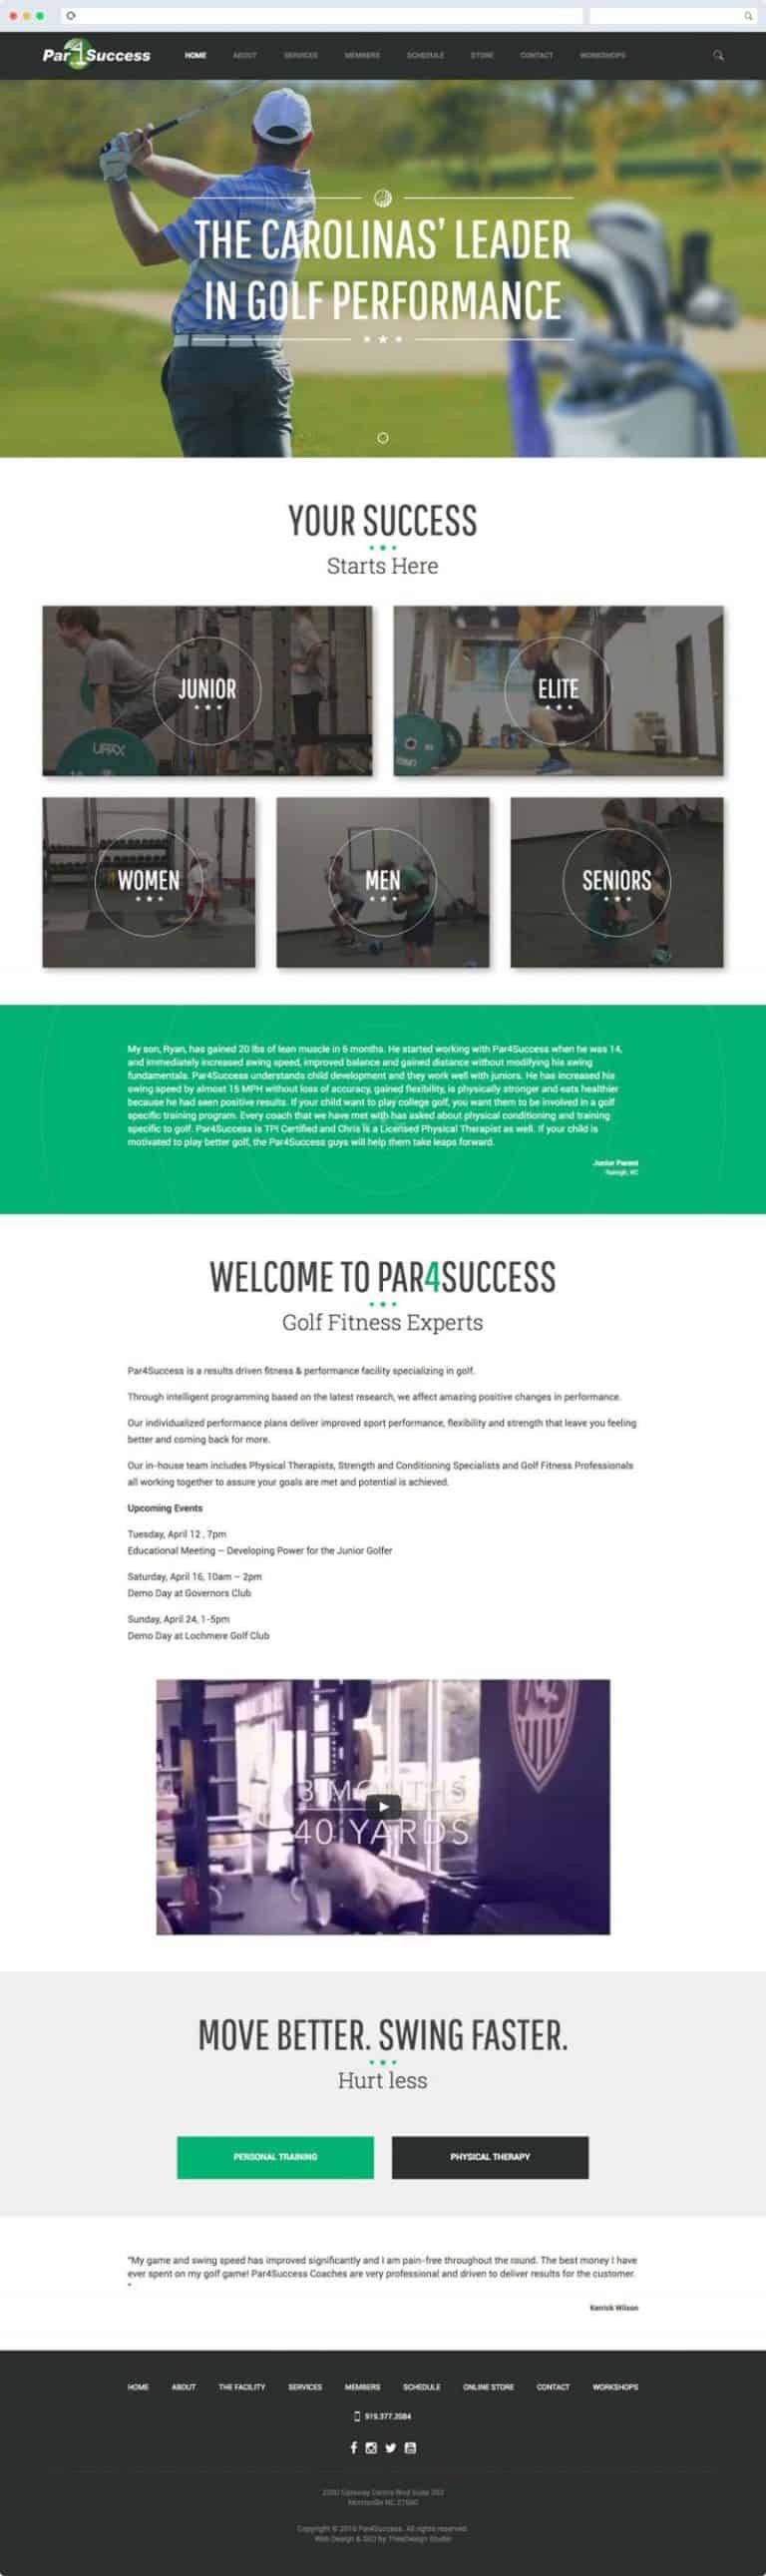 Custom Web Design for a Golf Fitness and Performance Company